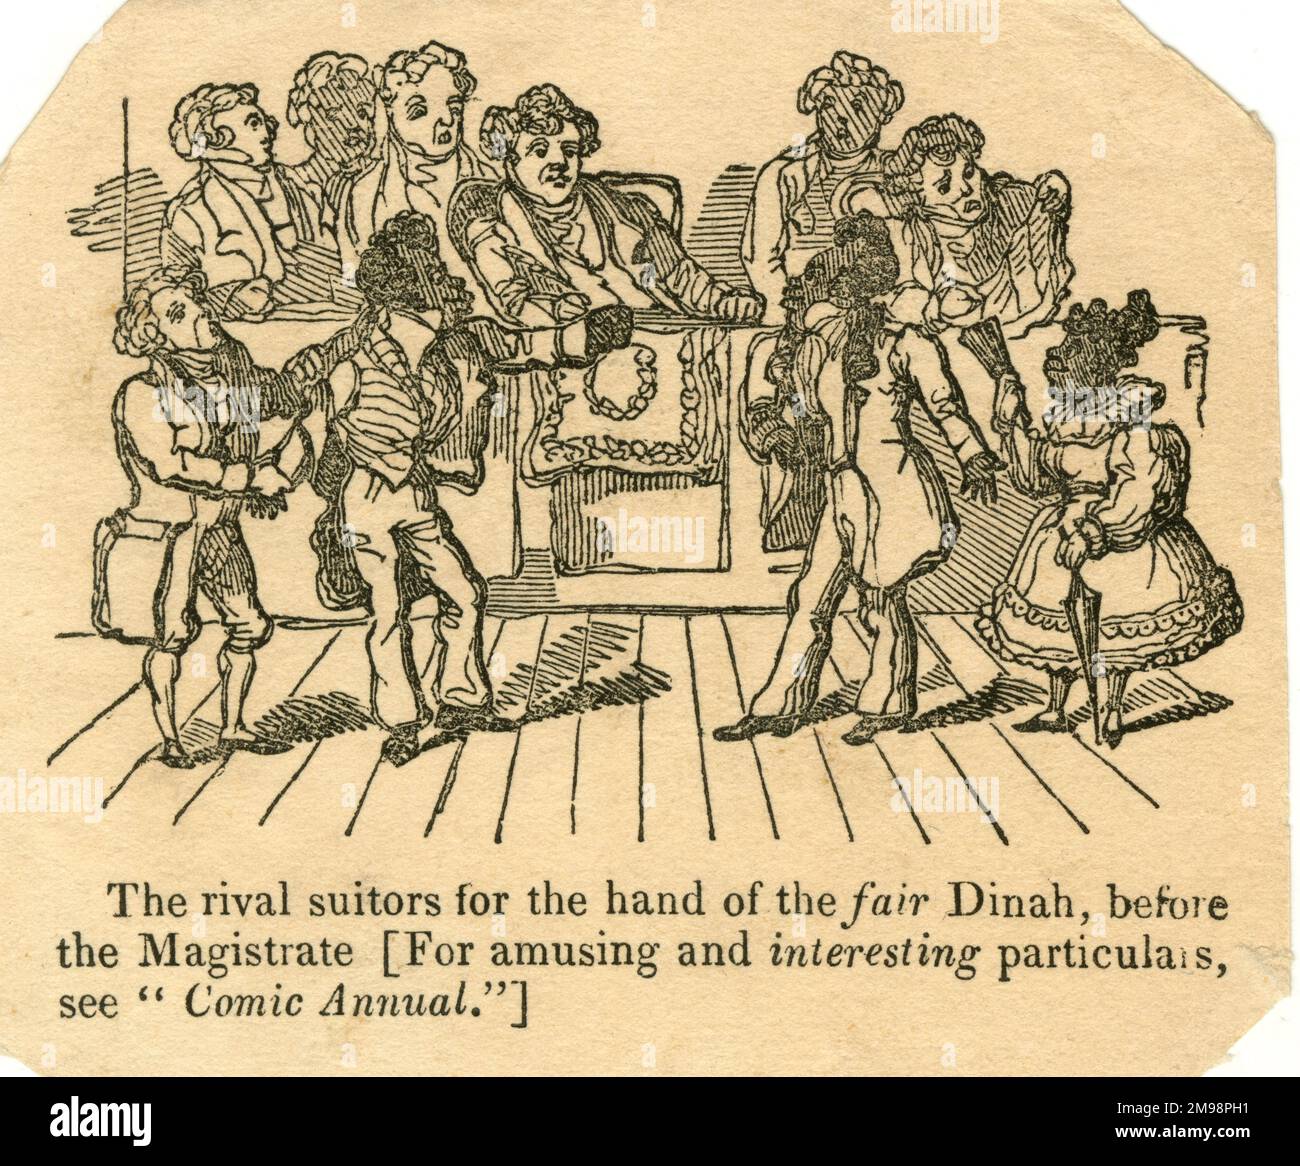 Cartoon, rival suitors for the hand of the fair Dinah, black stereotypes. Stock Photo